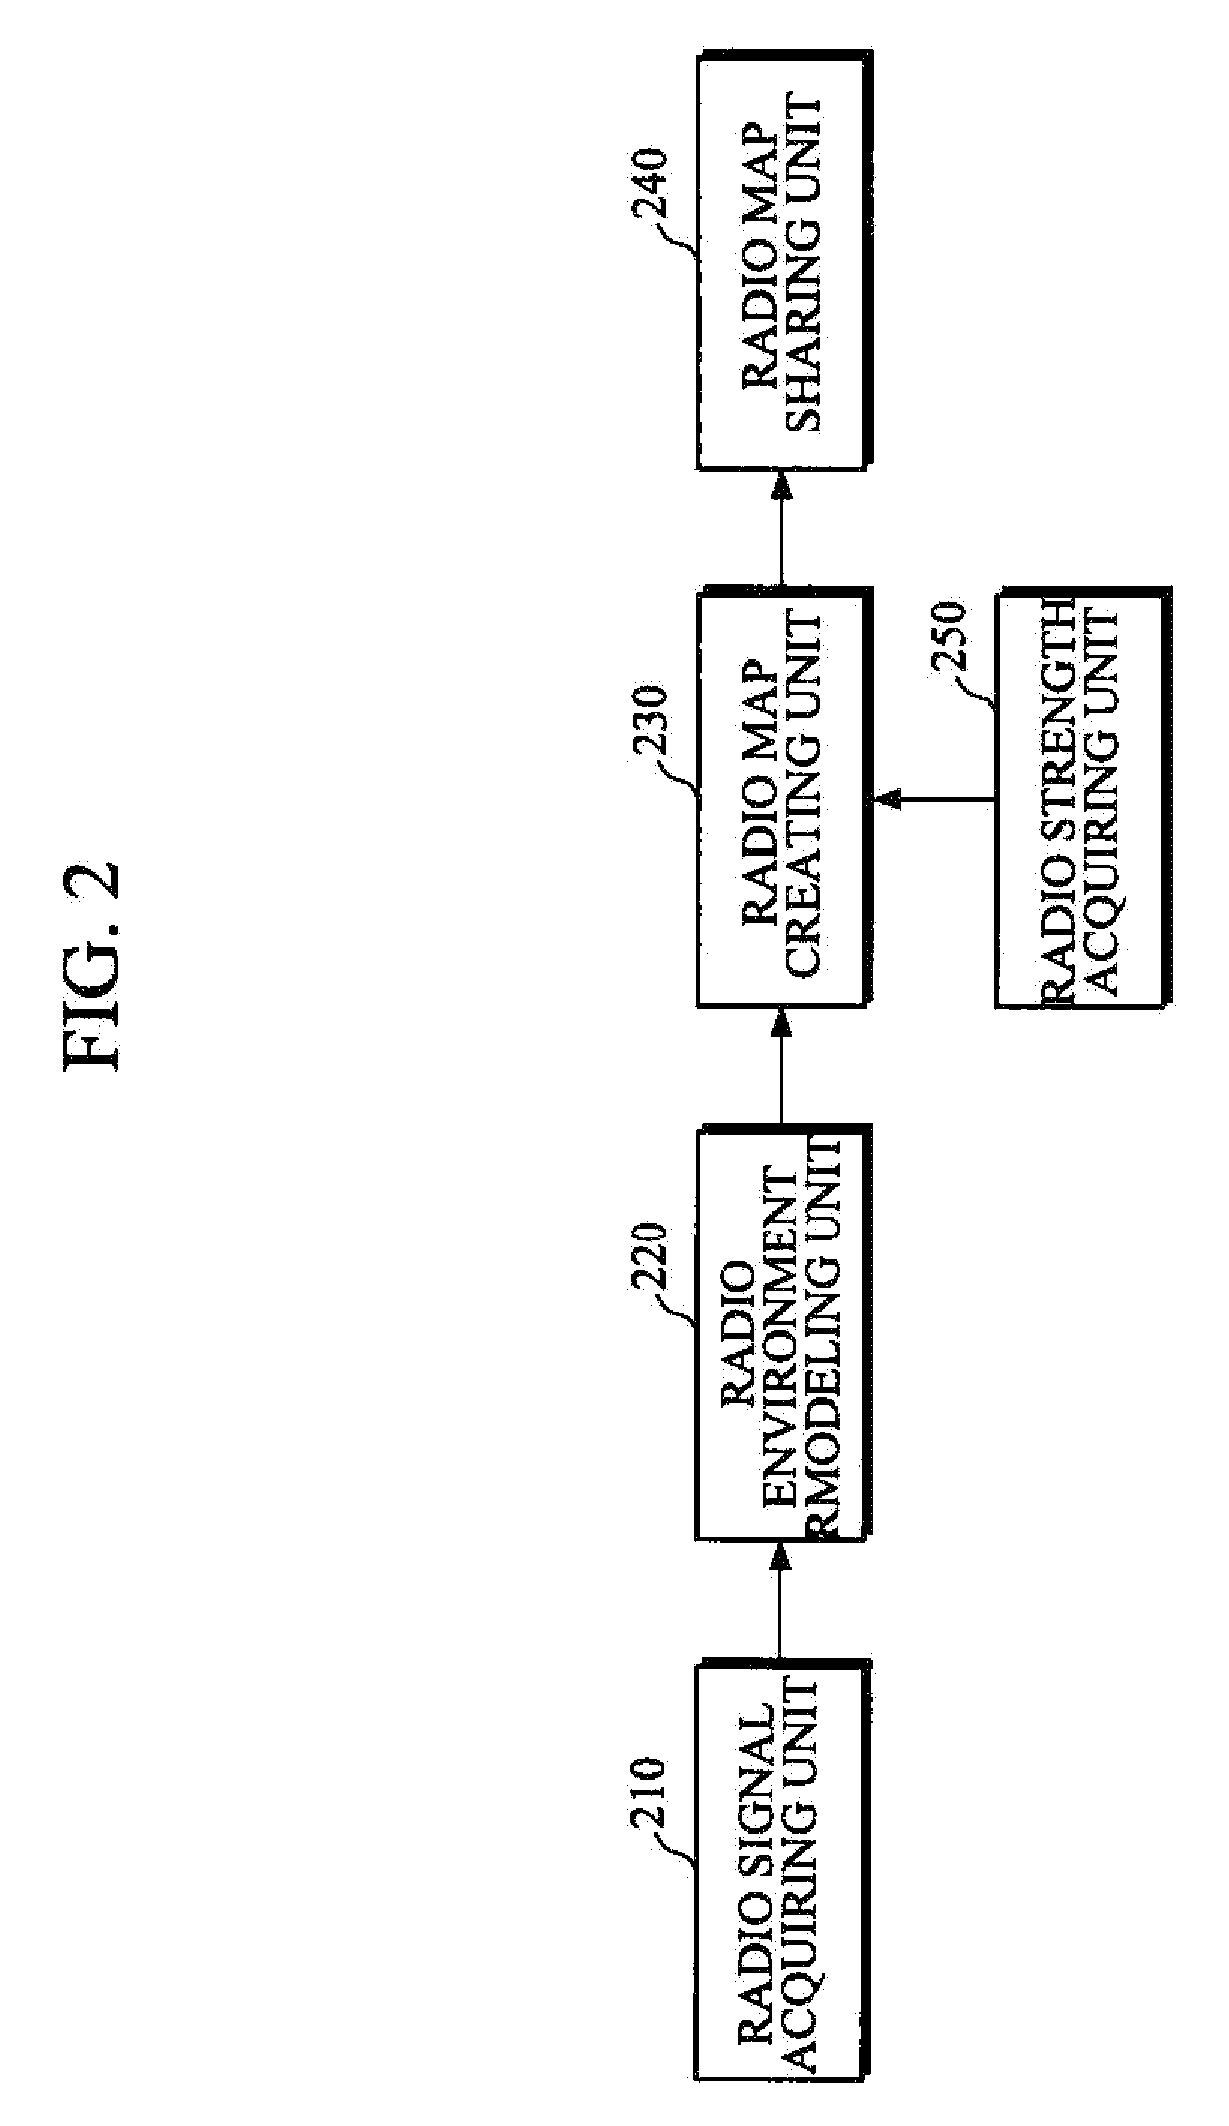 Apparatus and method for creating probability-based radio map for cooperative intelligent robots